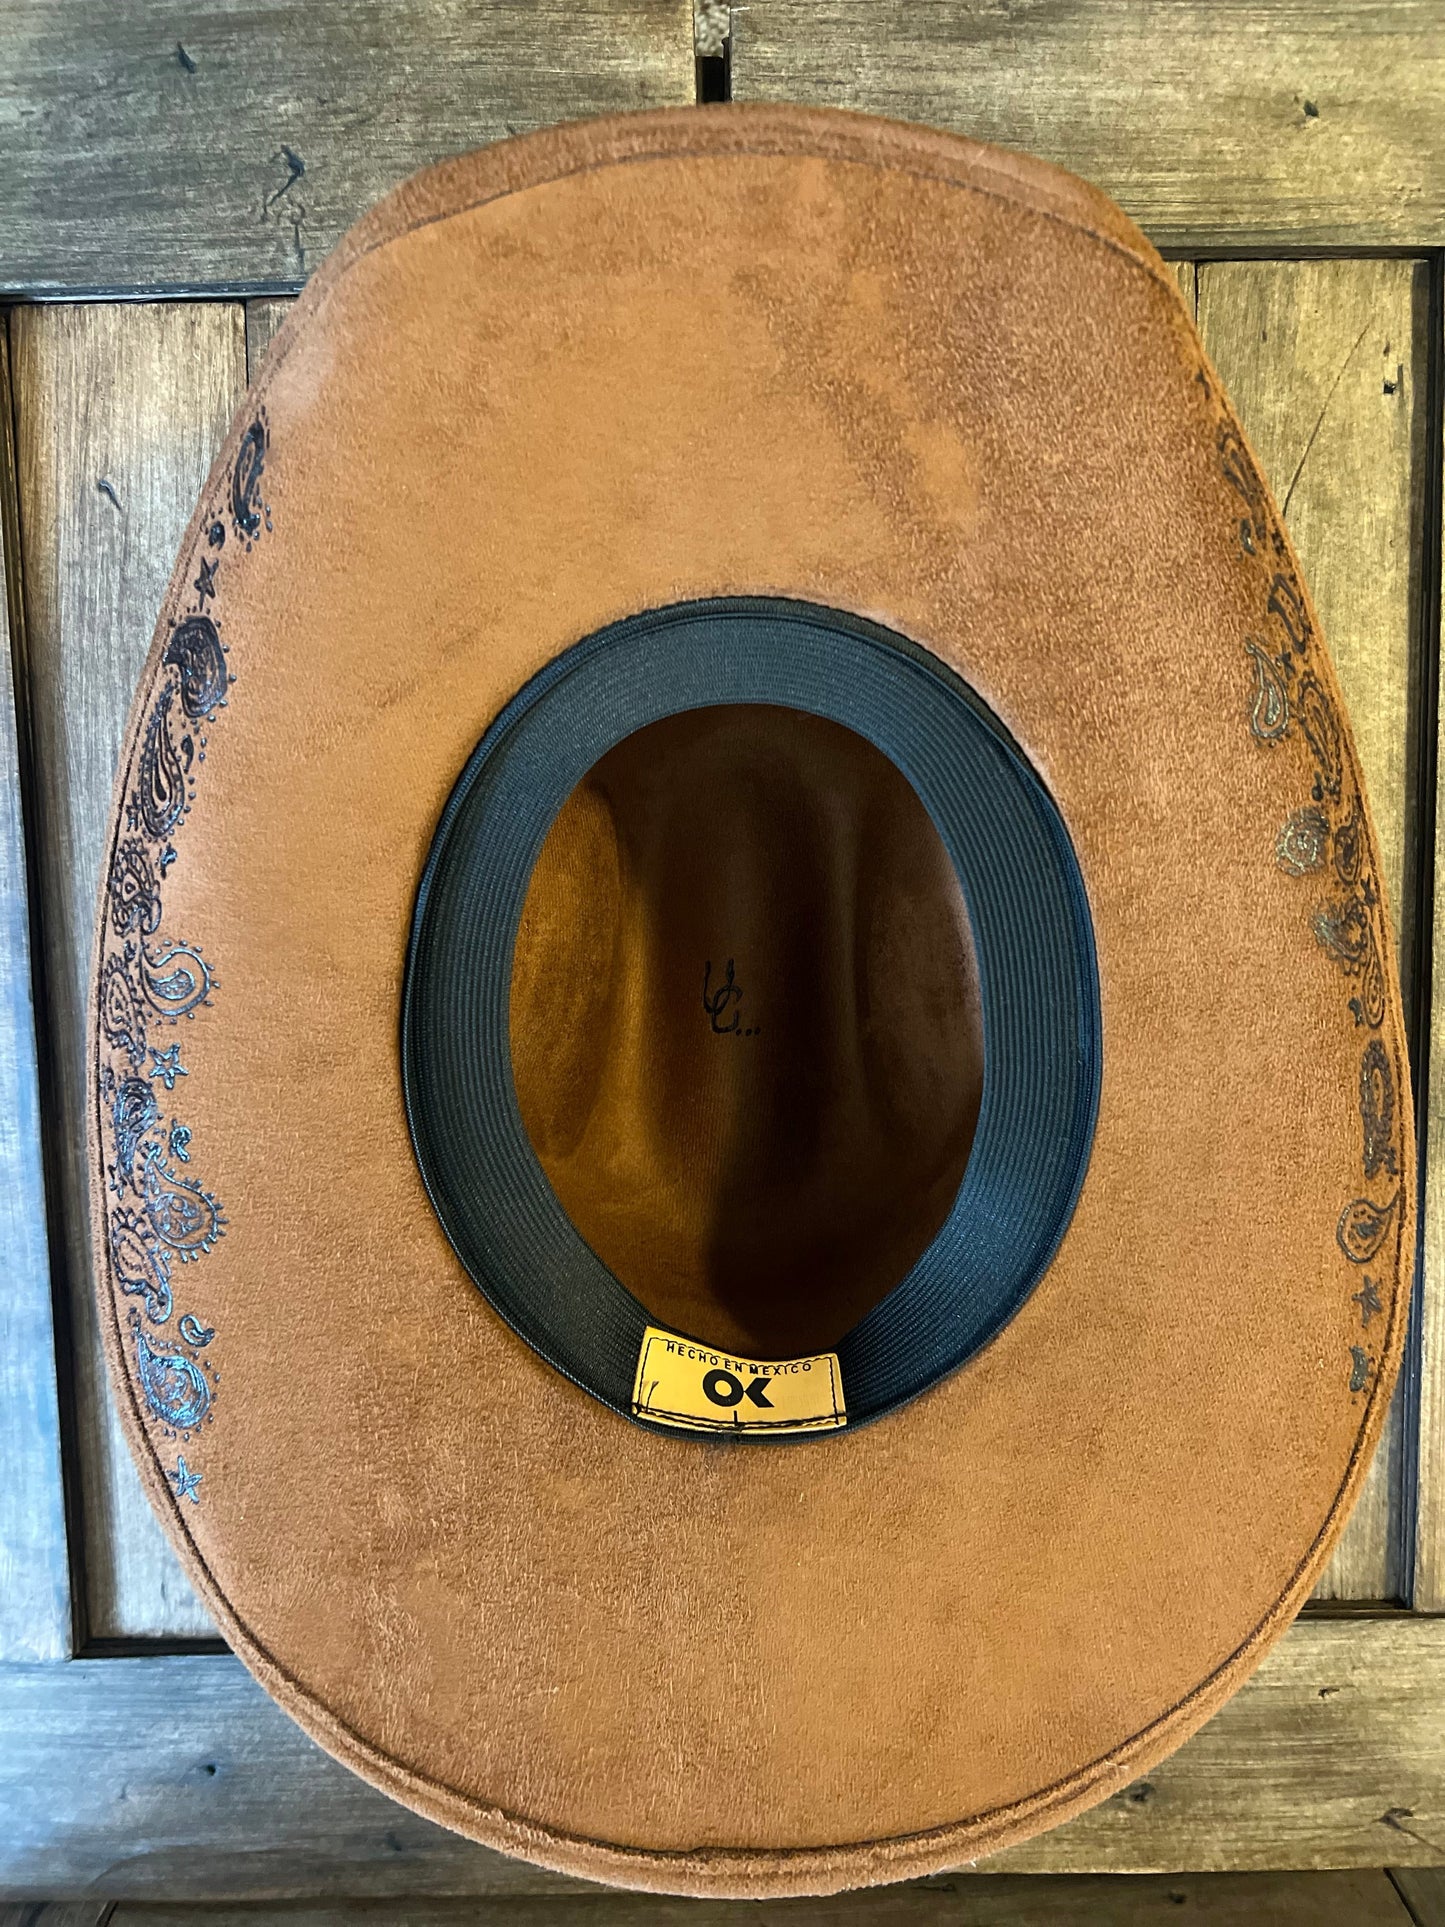 #135 - Longhorn and Paisley Cowboy Hat - Brown Suede